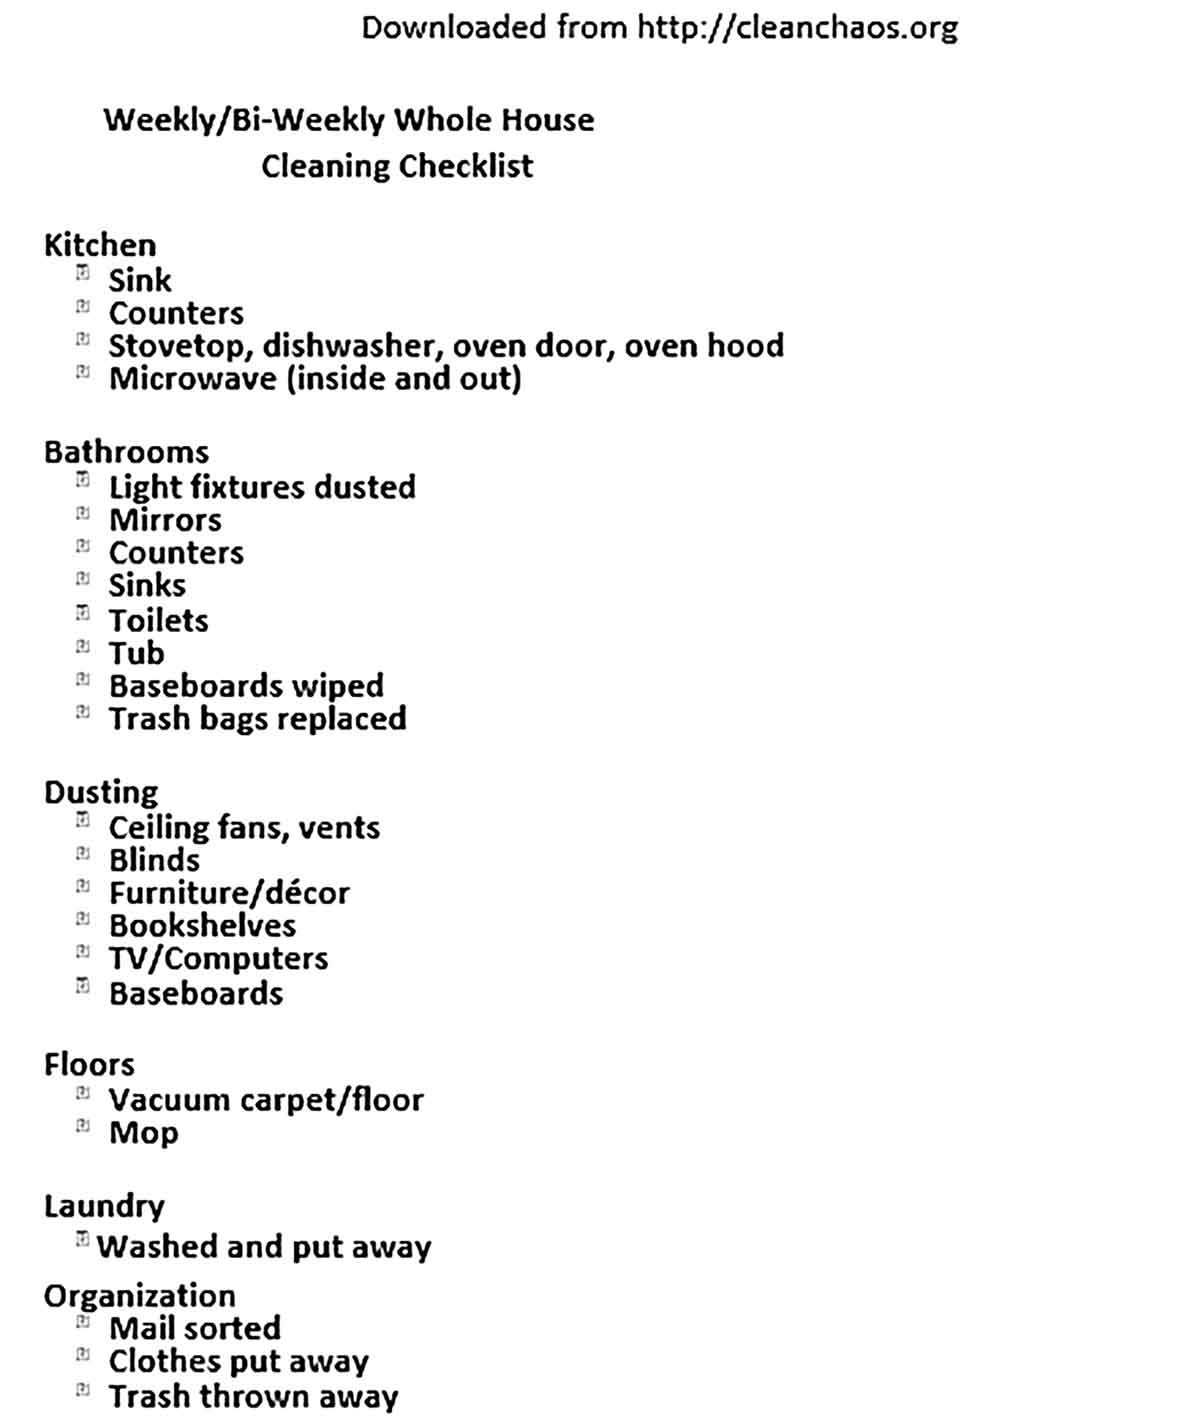 Template Bi Weekly Whole House Cleaning Checklist Sample